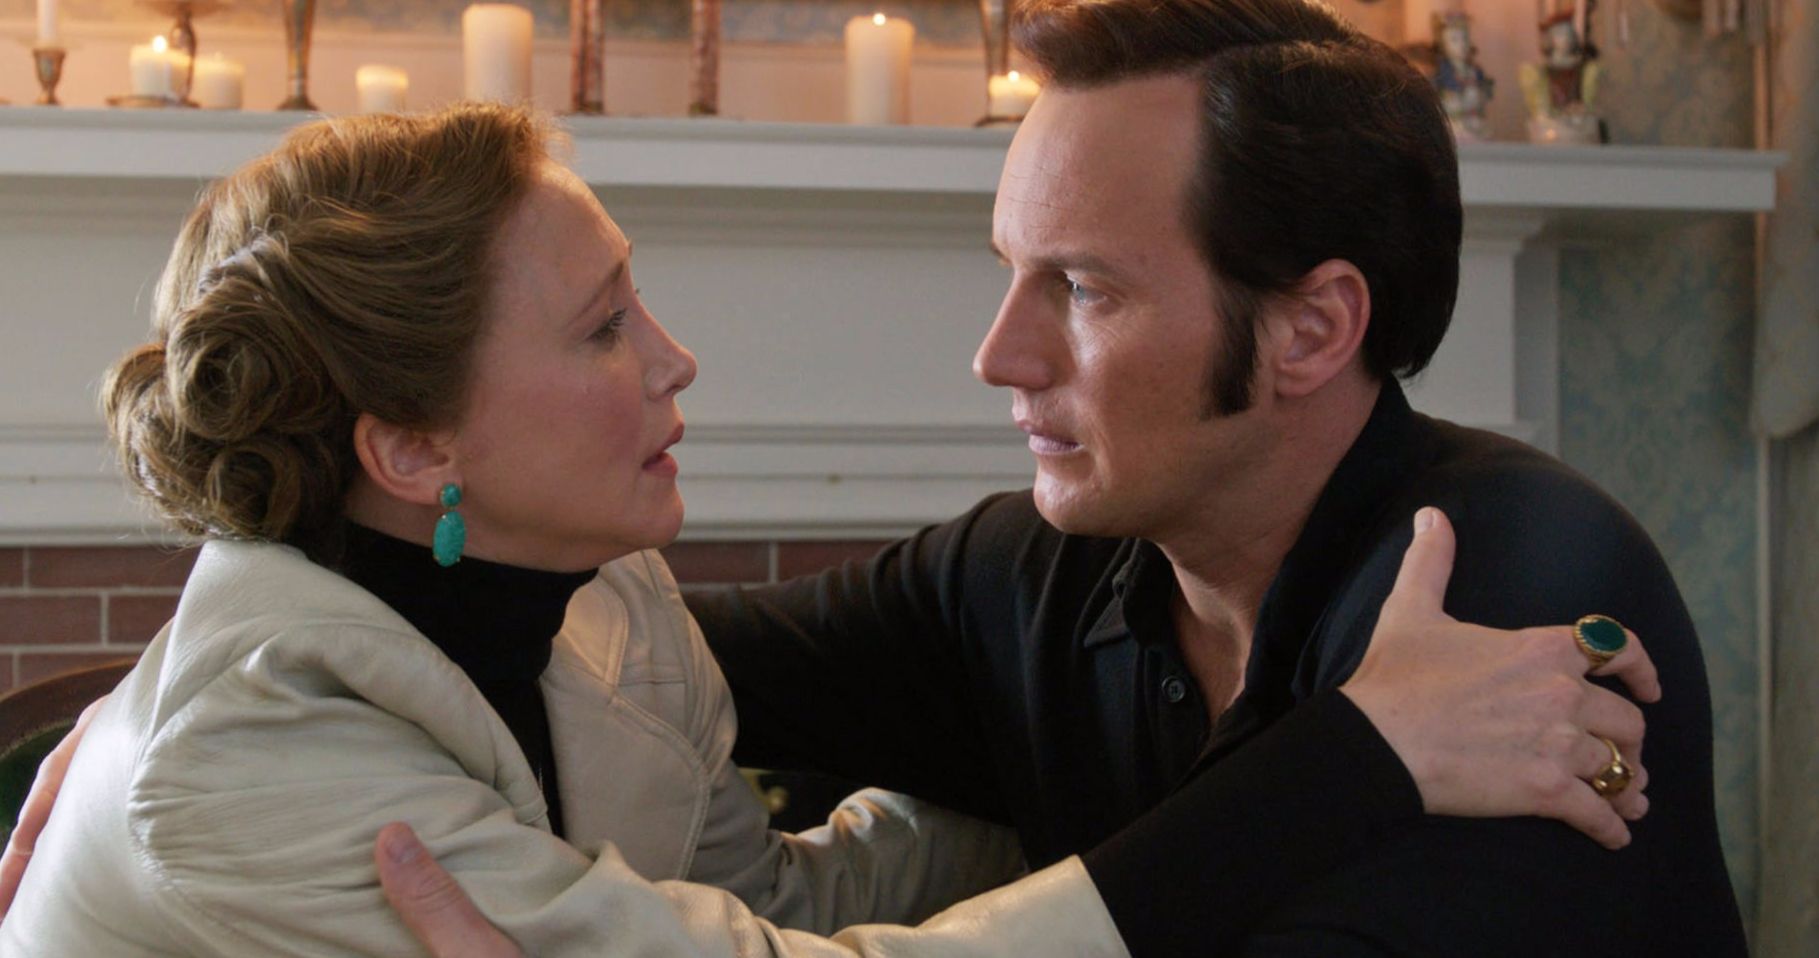 The Conjuring 3 Begins Production, Vera Farmiga Shares First Photo